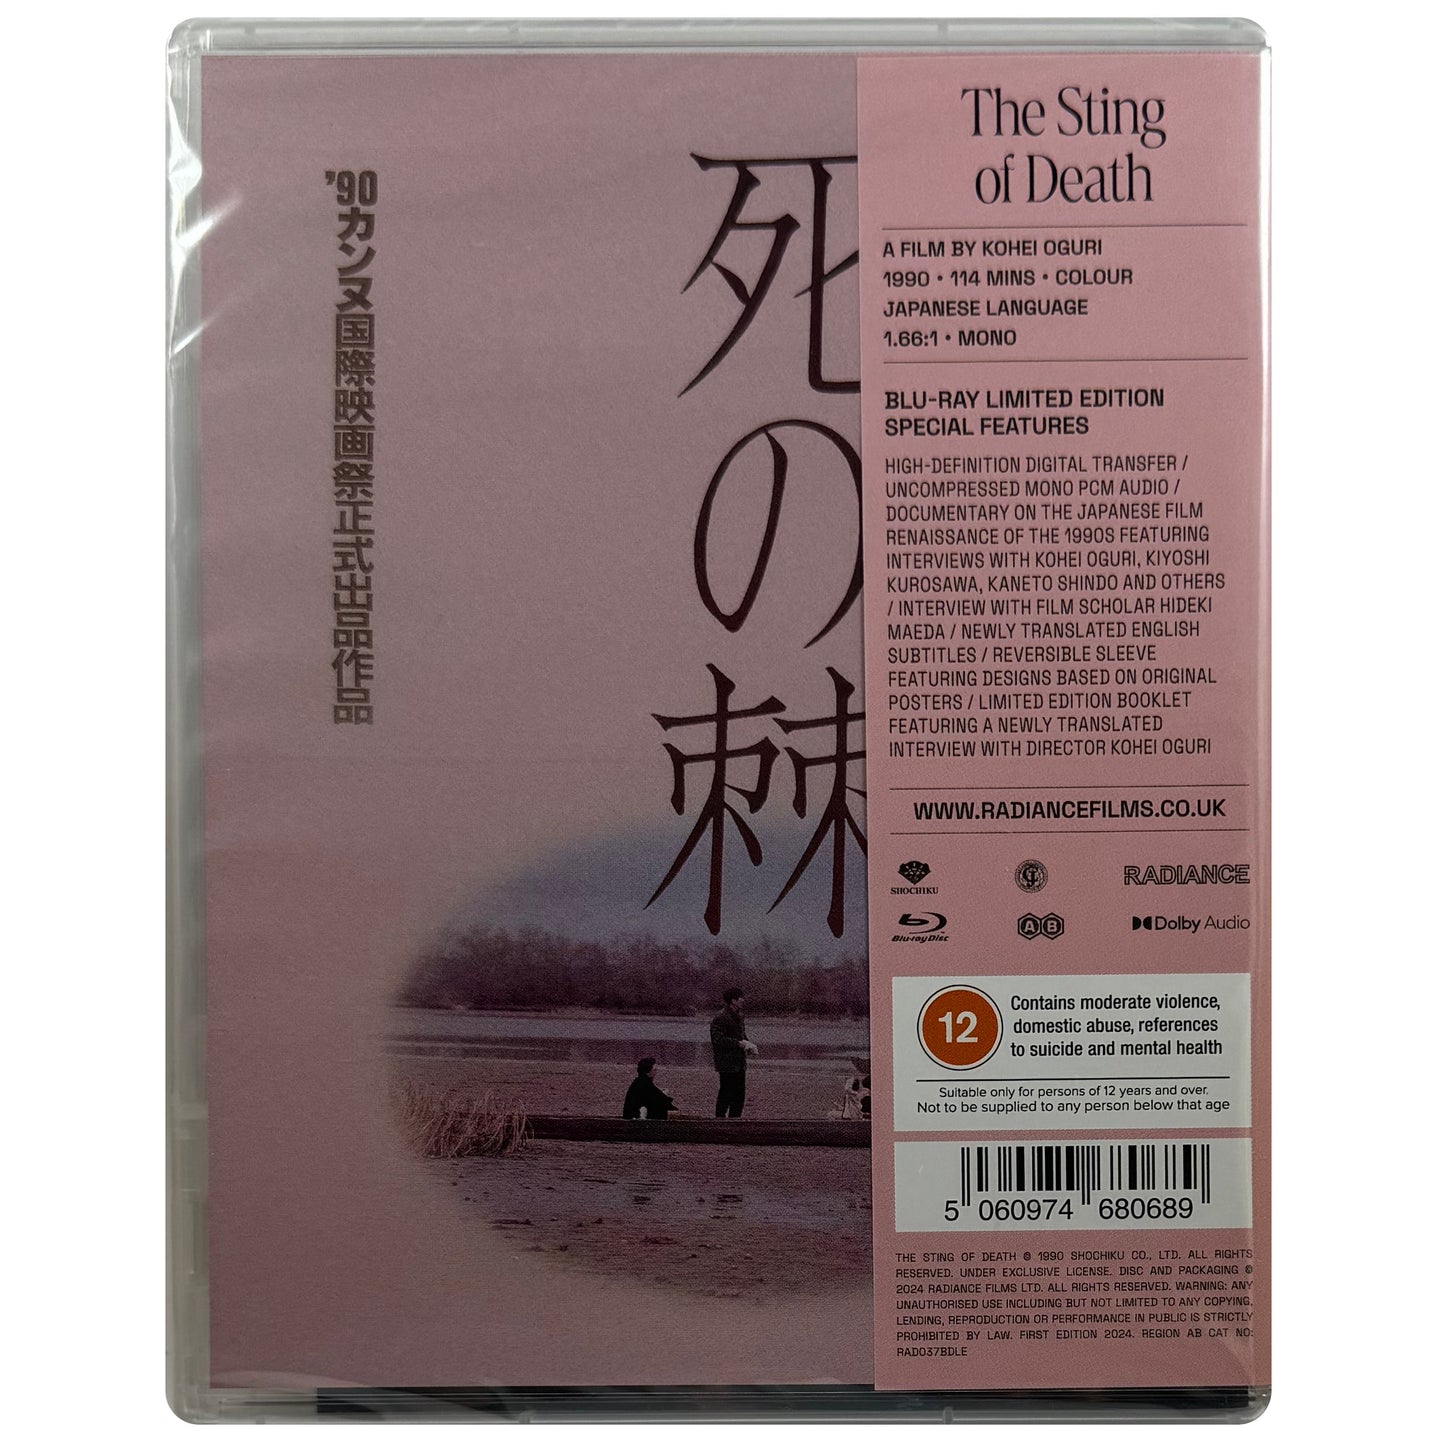 The Sting of Death Blu-Ray - Limited Edition